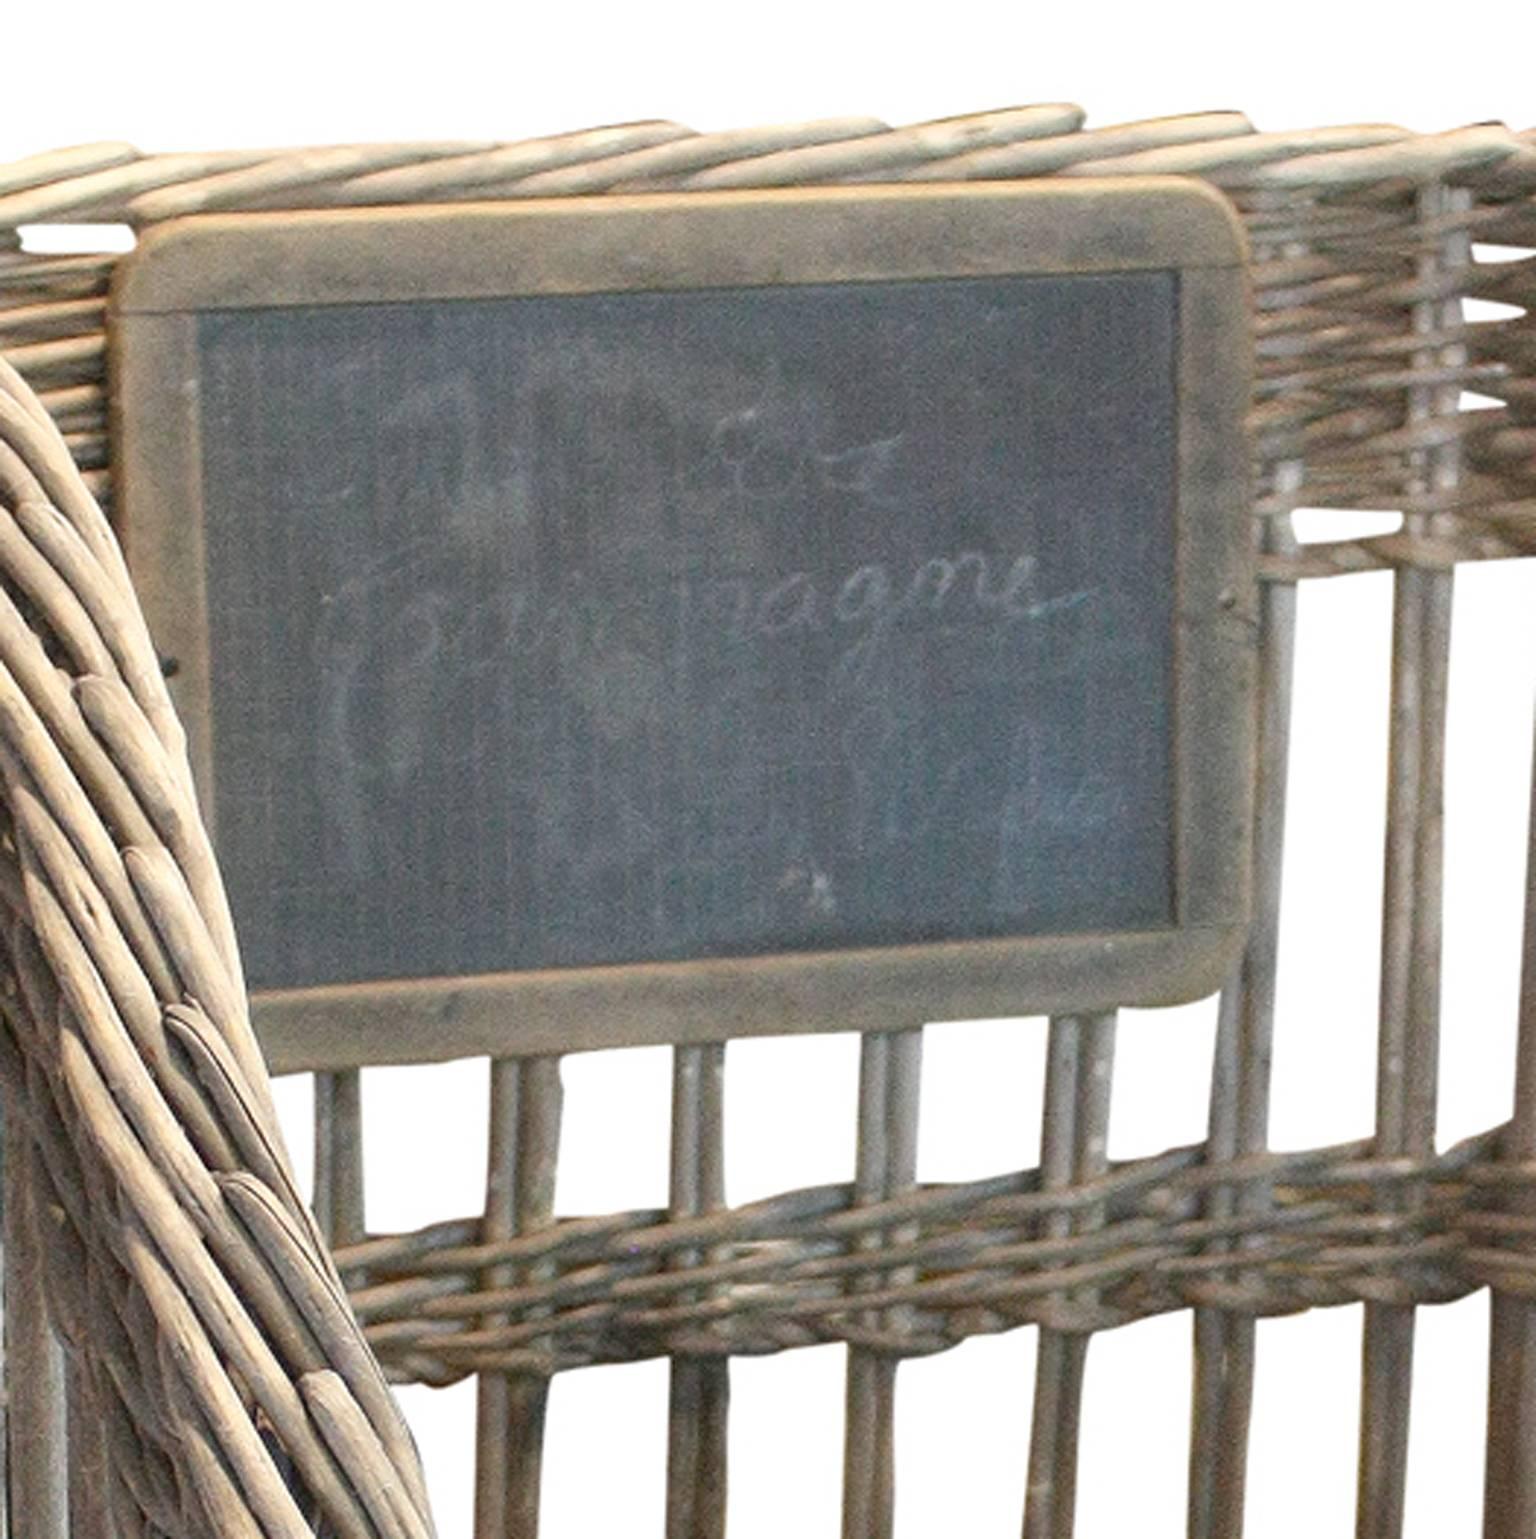 This French large size wicker baguette basket from the 19th century is the perfect object to decorate your home. Purchased from a French baker, the basket still features its chalk board, on which one can make out the faint text: Pain de Campagne.